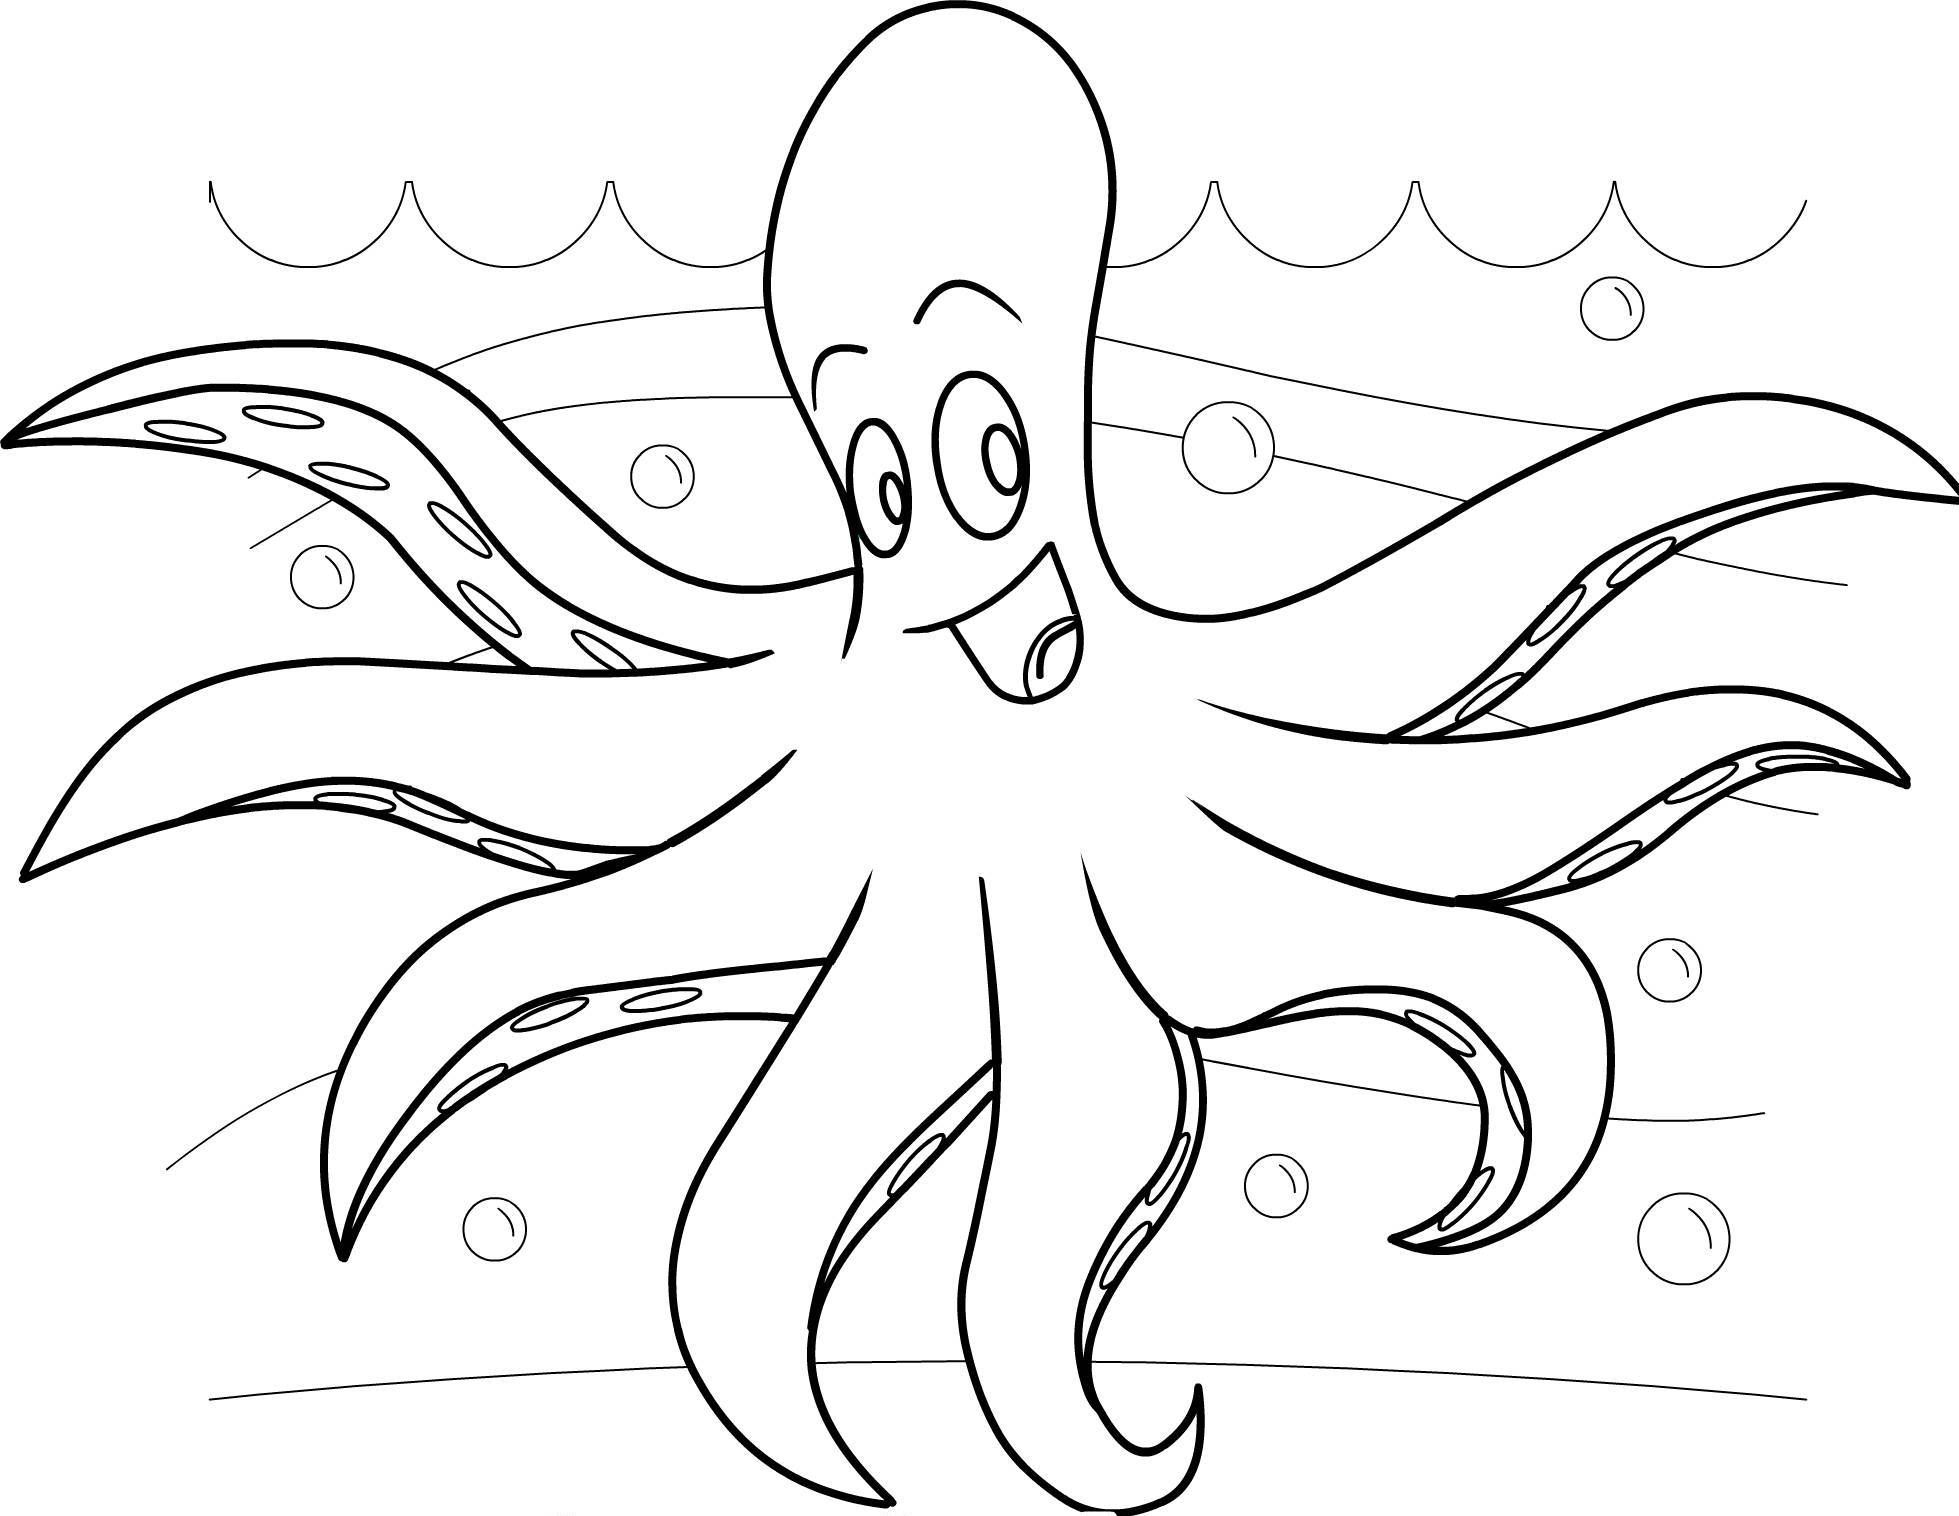 Octopus Colouring Pages - Colorine.net | #20596